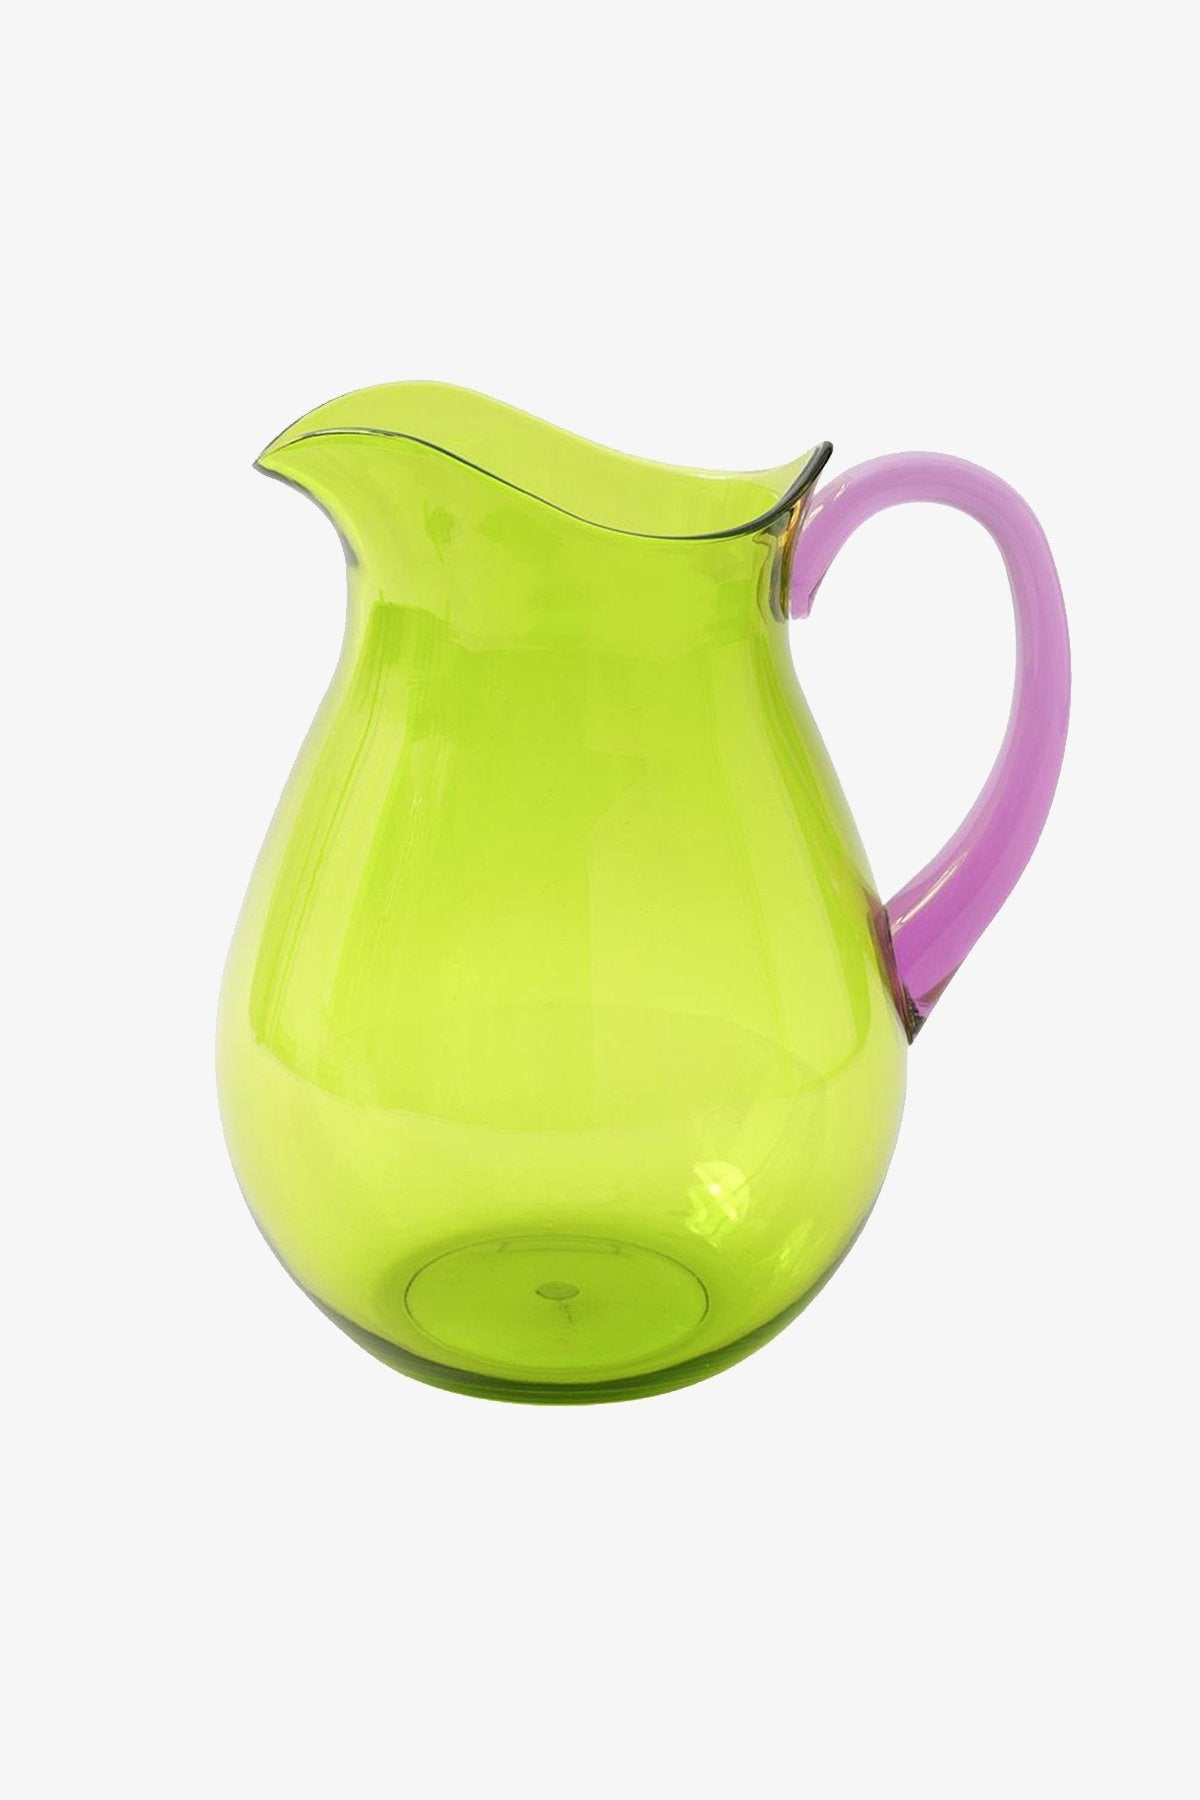 Acrylic Pitcher in Green with Amethyst Handle - shop-olivia.com